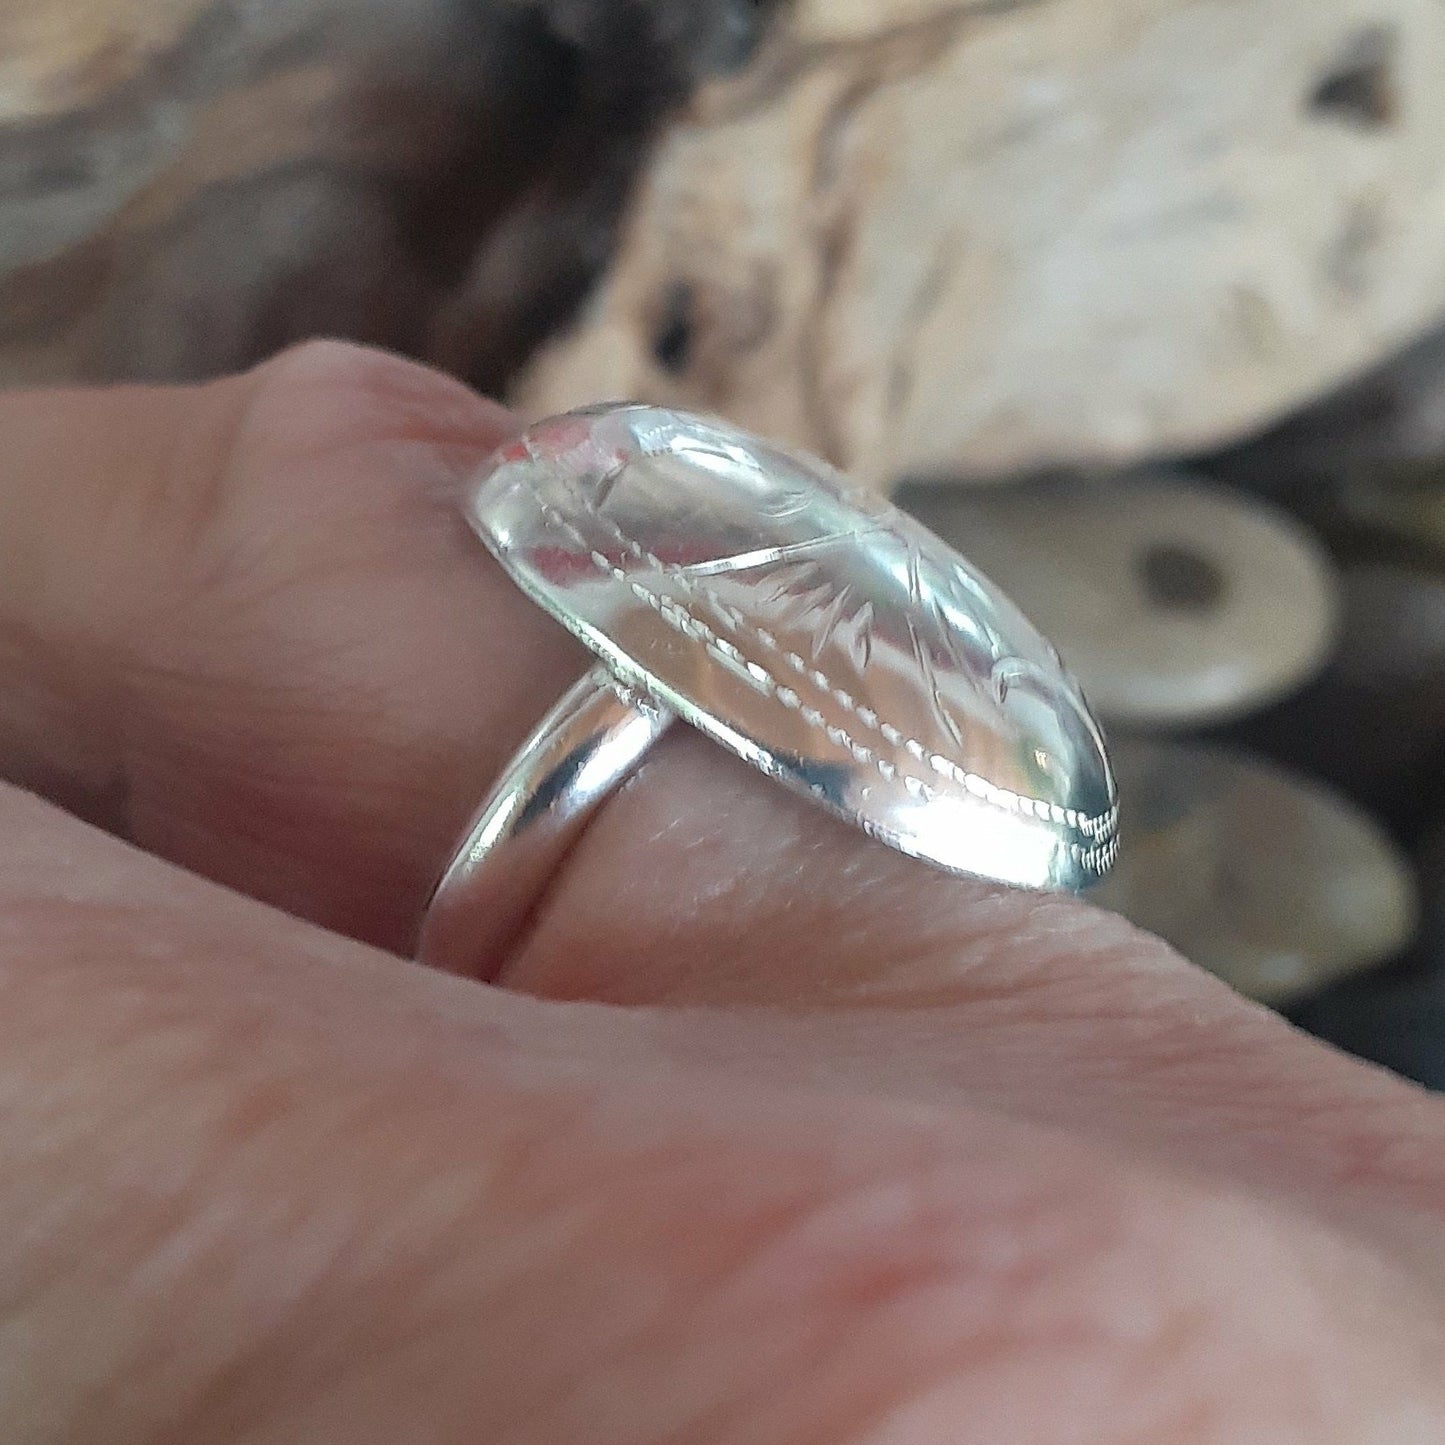 Hollow Formed Ingraved Ring in Sterling |WRD - WarmRainyDay